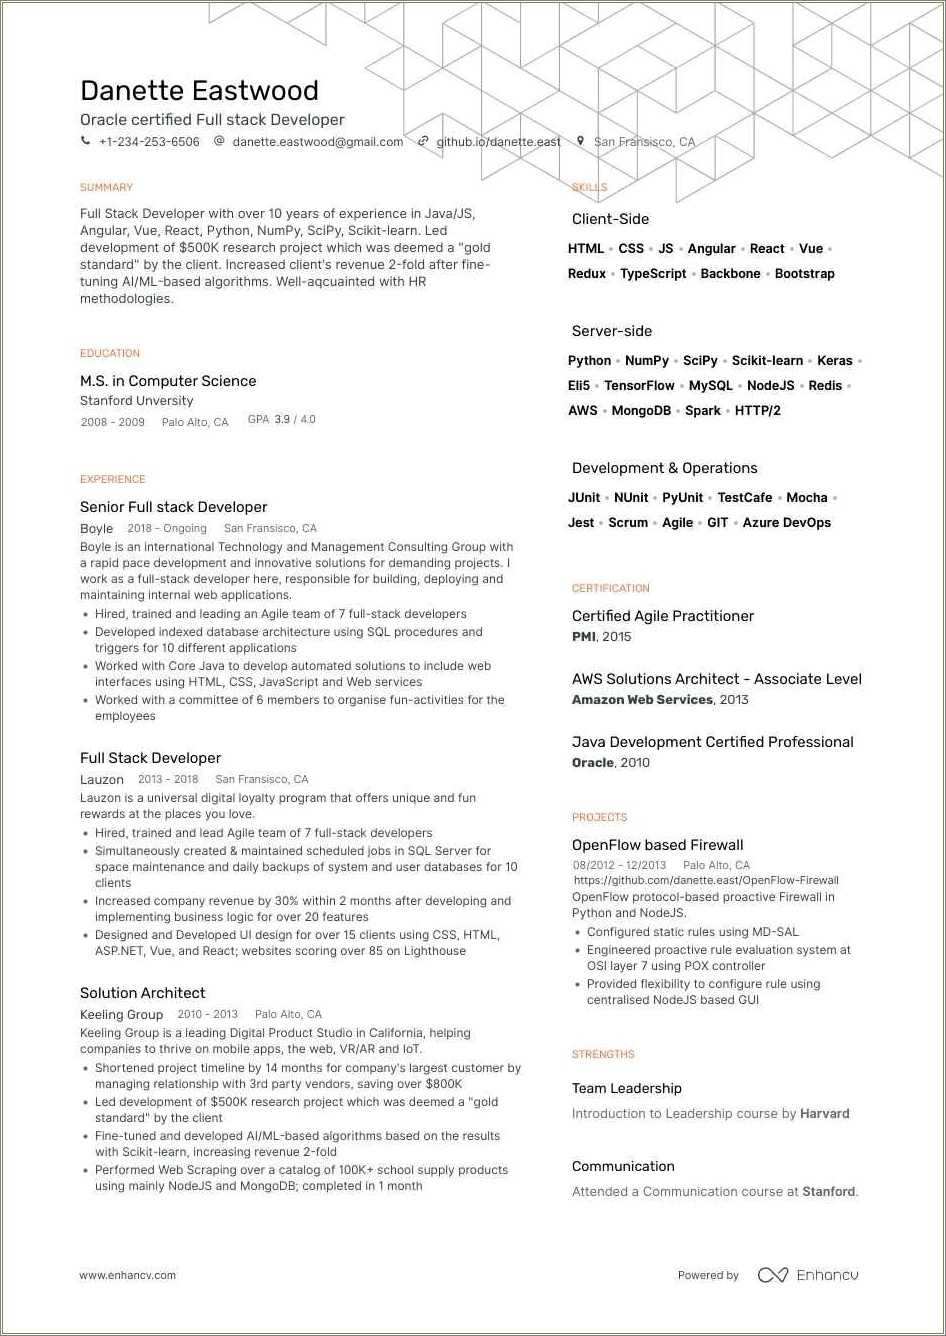 Java Sample Resumes With 5+ Years Of Experience